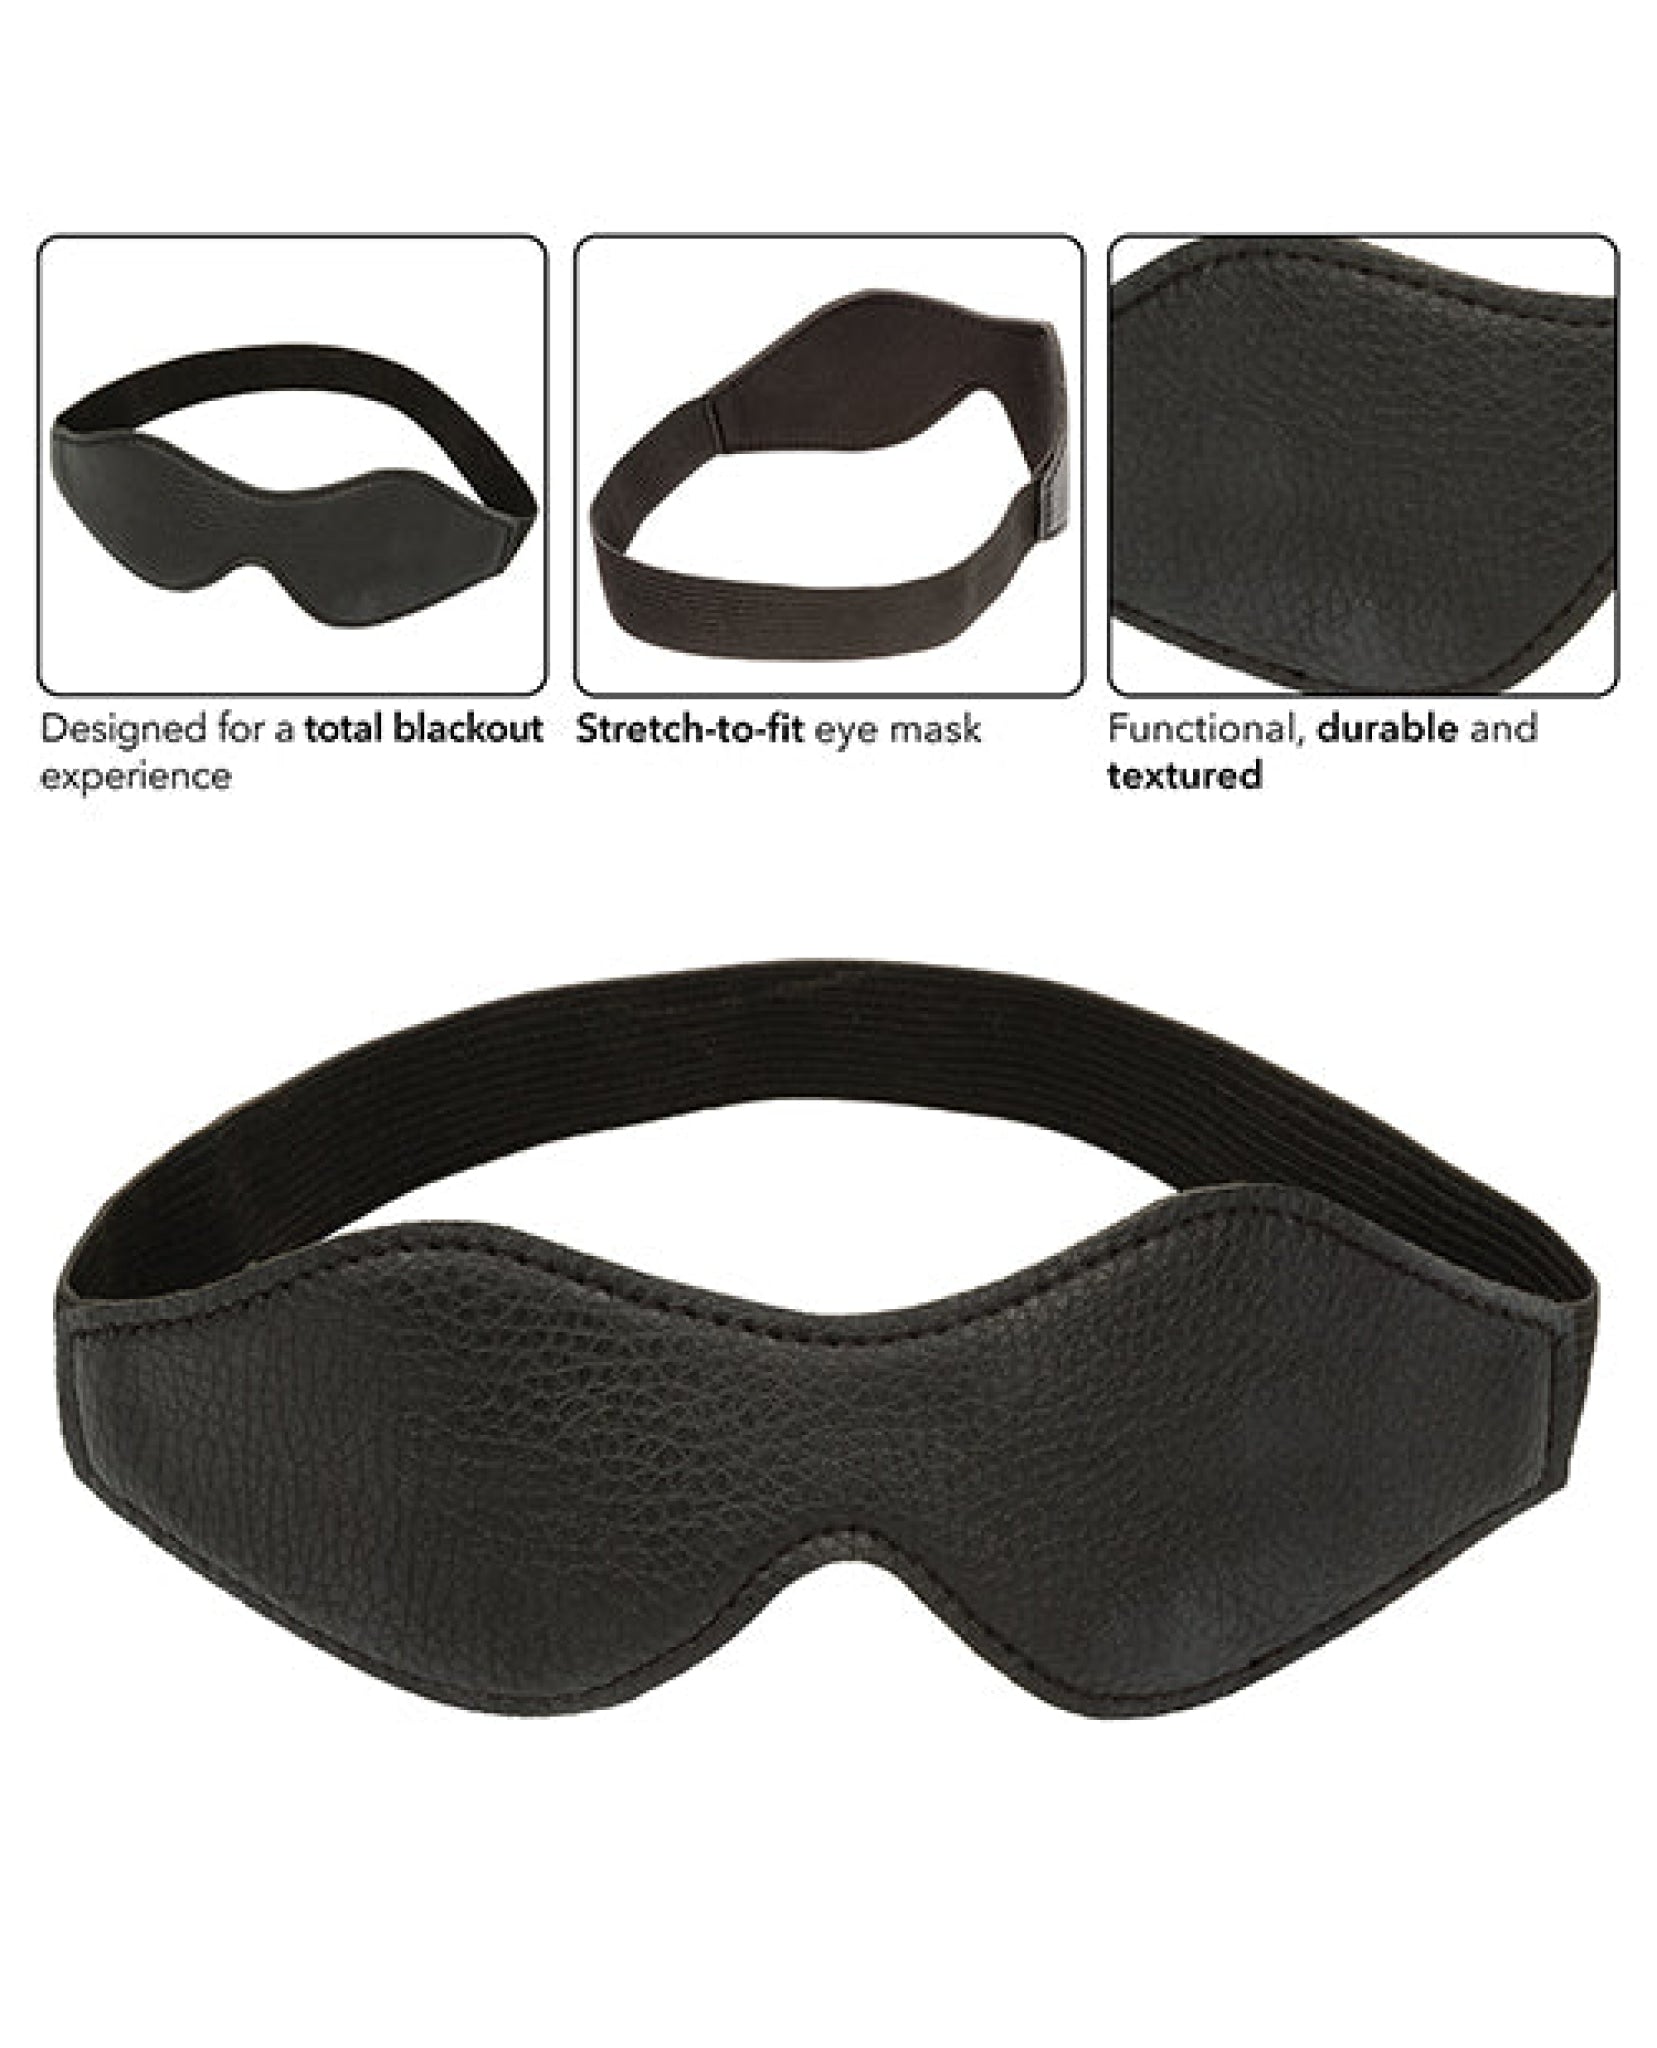 Nocturnal Collection Stretch to Fit Eye Mask - Black California Exotic Novelties